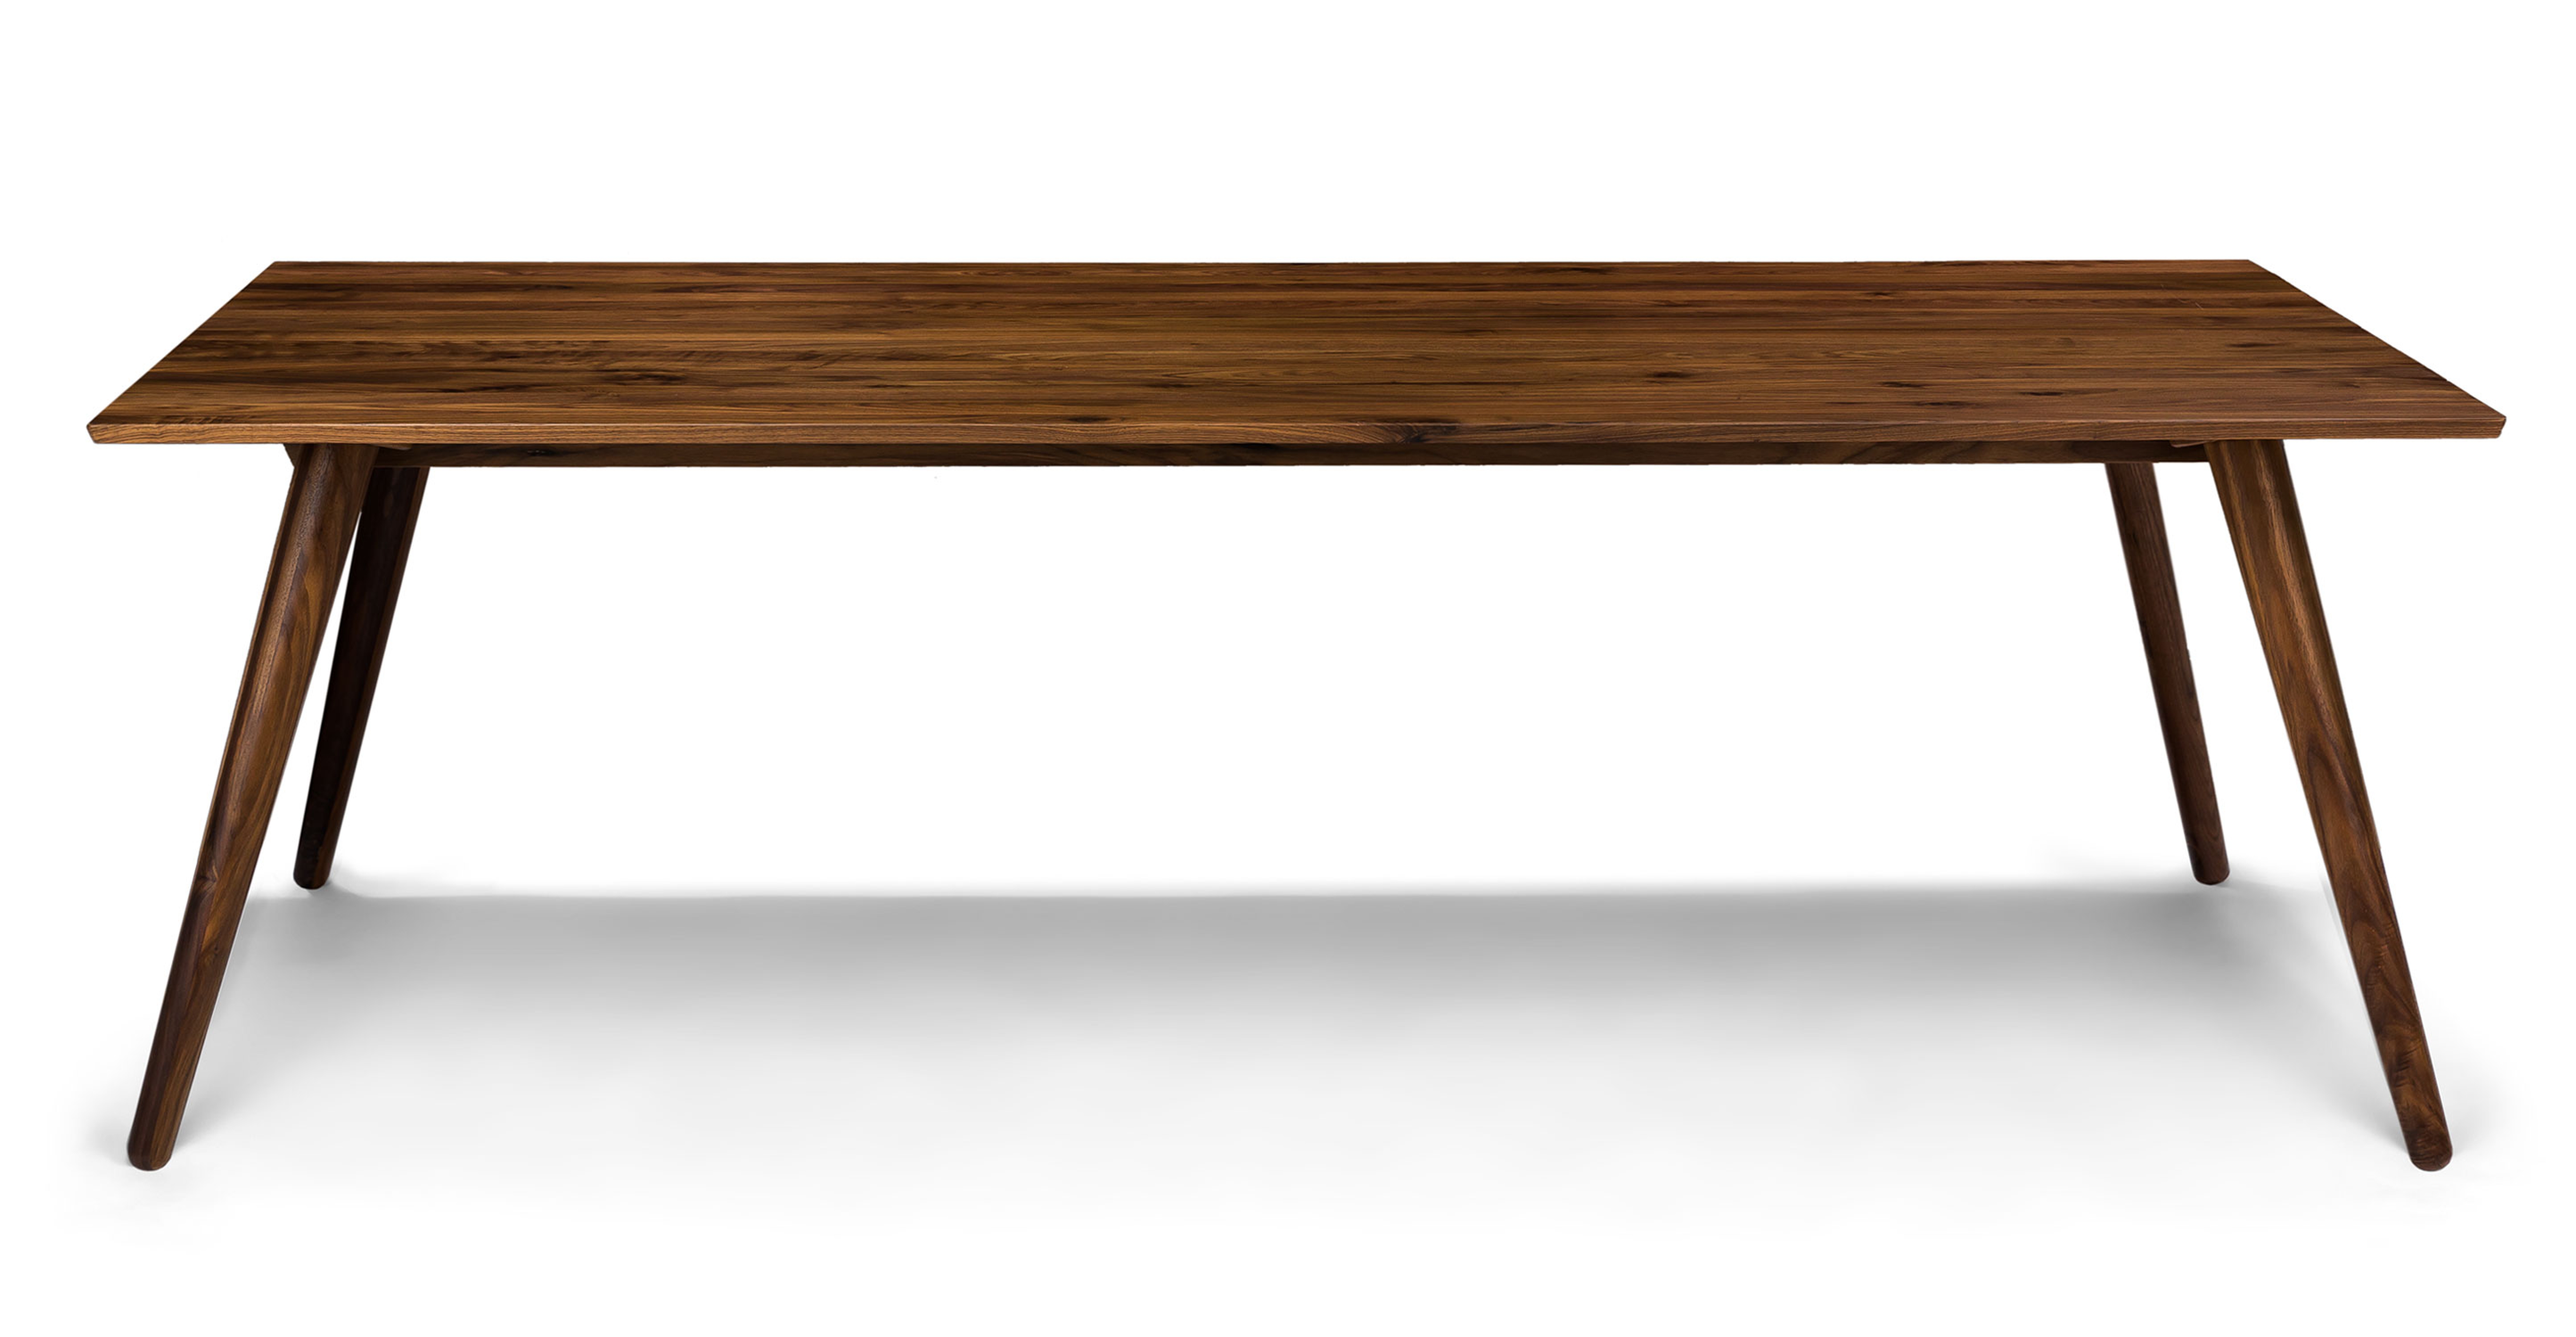 Seno Walnut Dining Table For 6-8 - Article